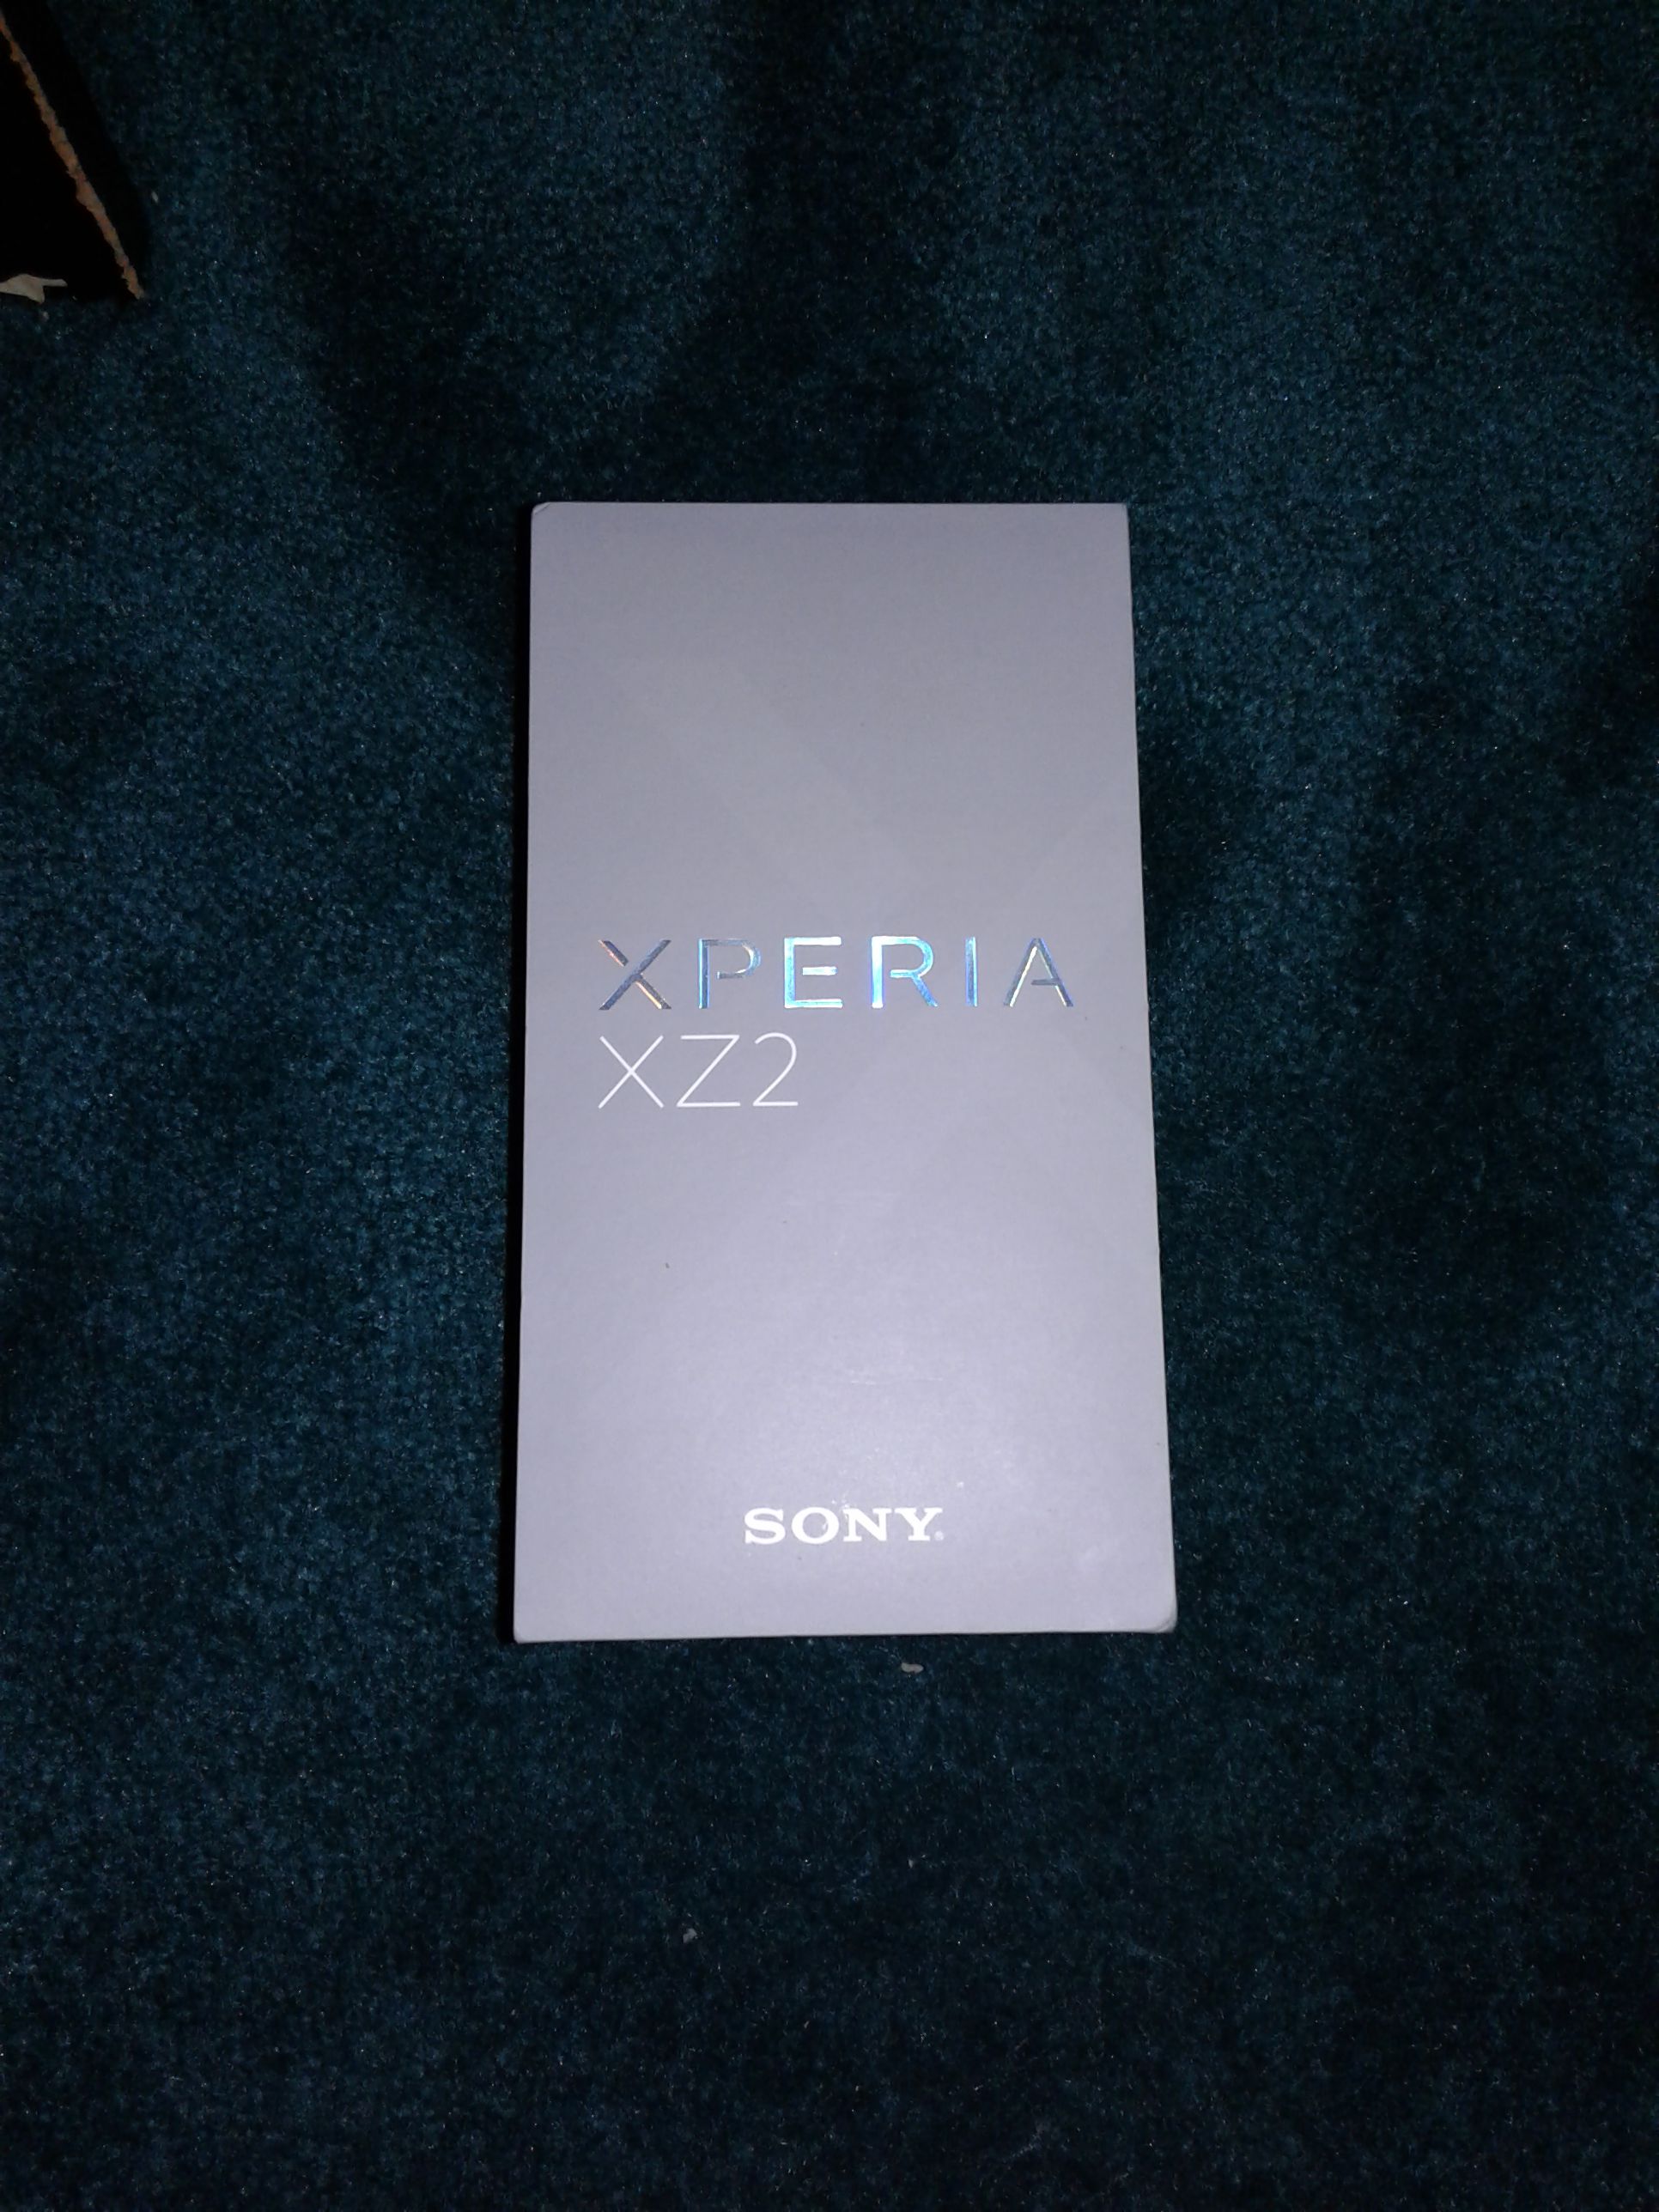 Sony Xperia xz 2 BRAND new in box never opened